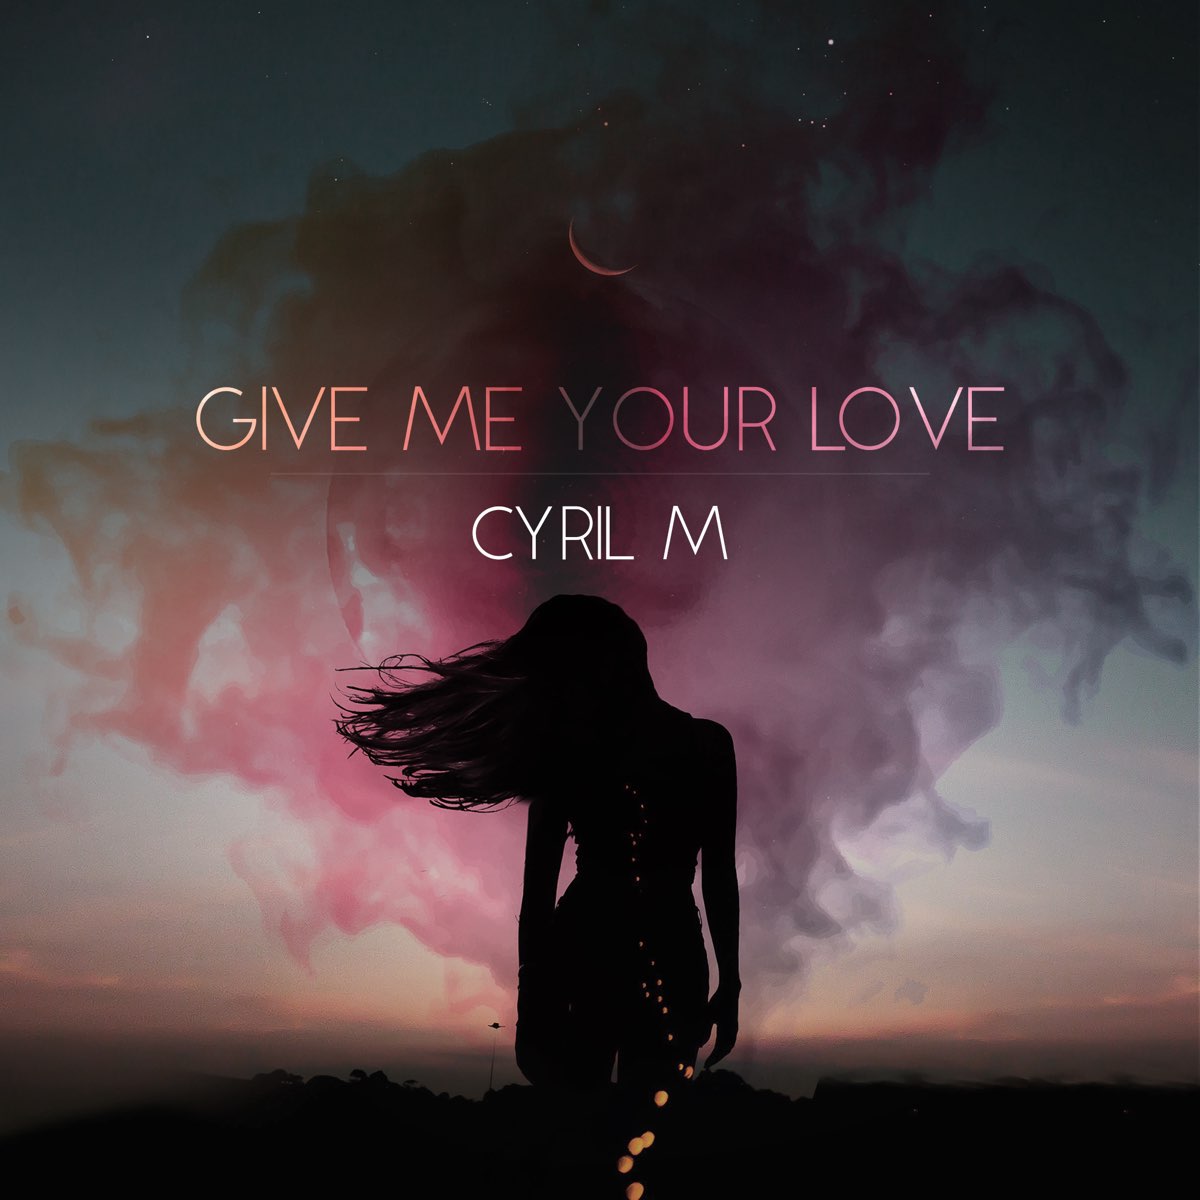 Give love remix. Give me. Give me your Love. Cyril Remix. Your Love Remix.